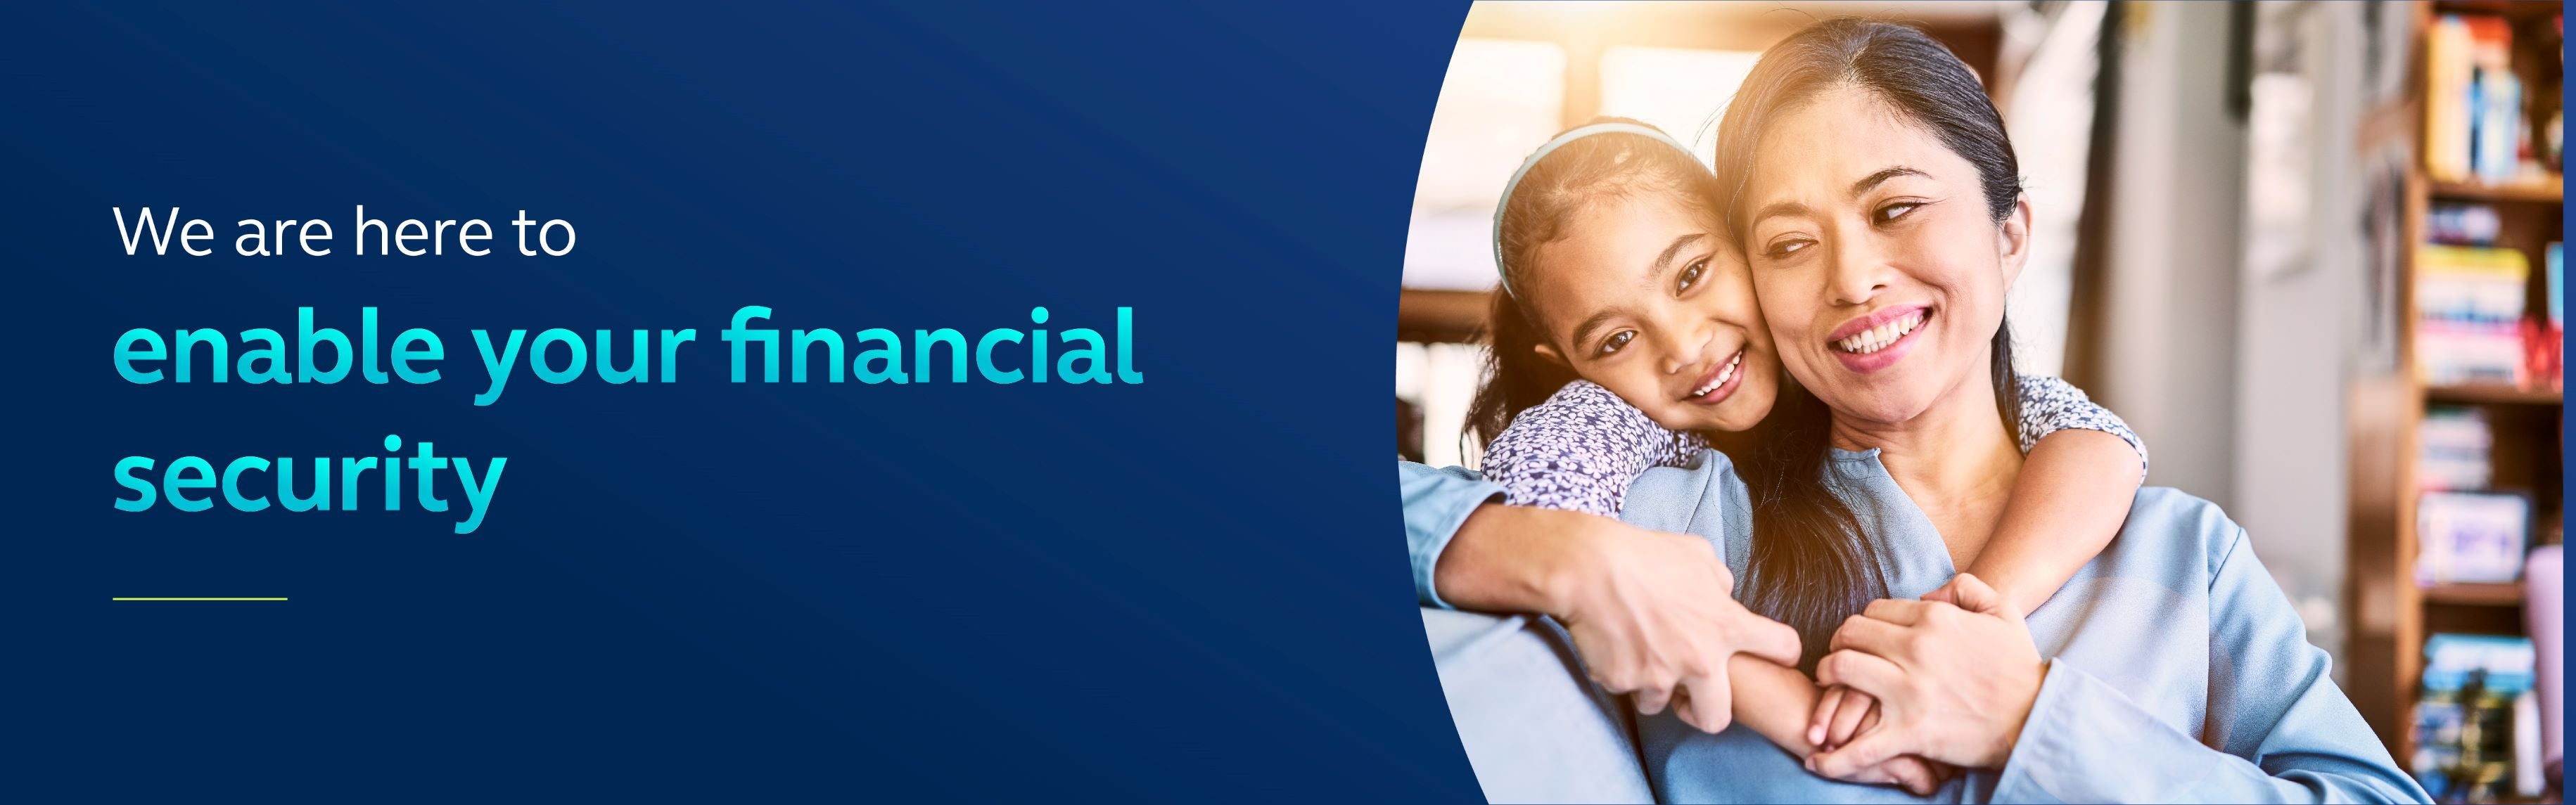 Principal is Here to Enable Your Financial Security 